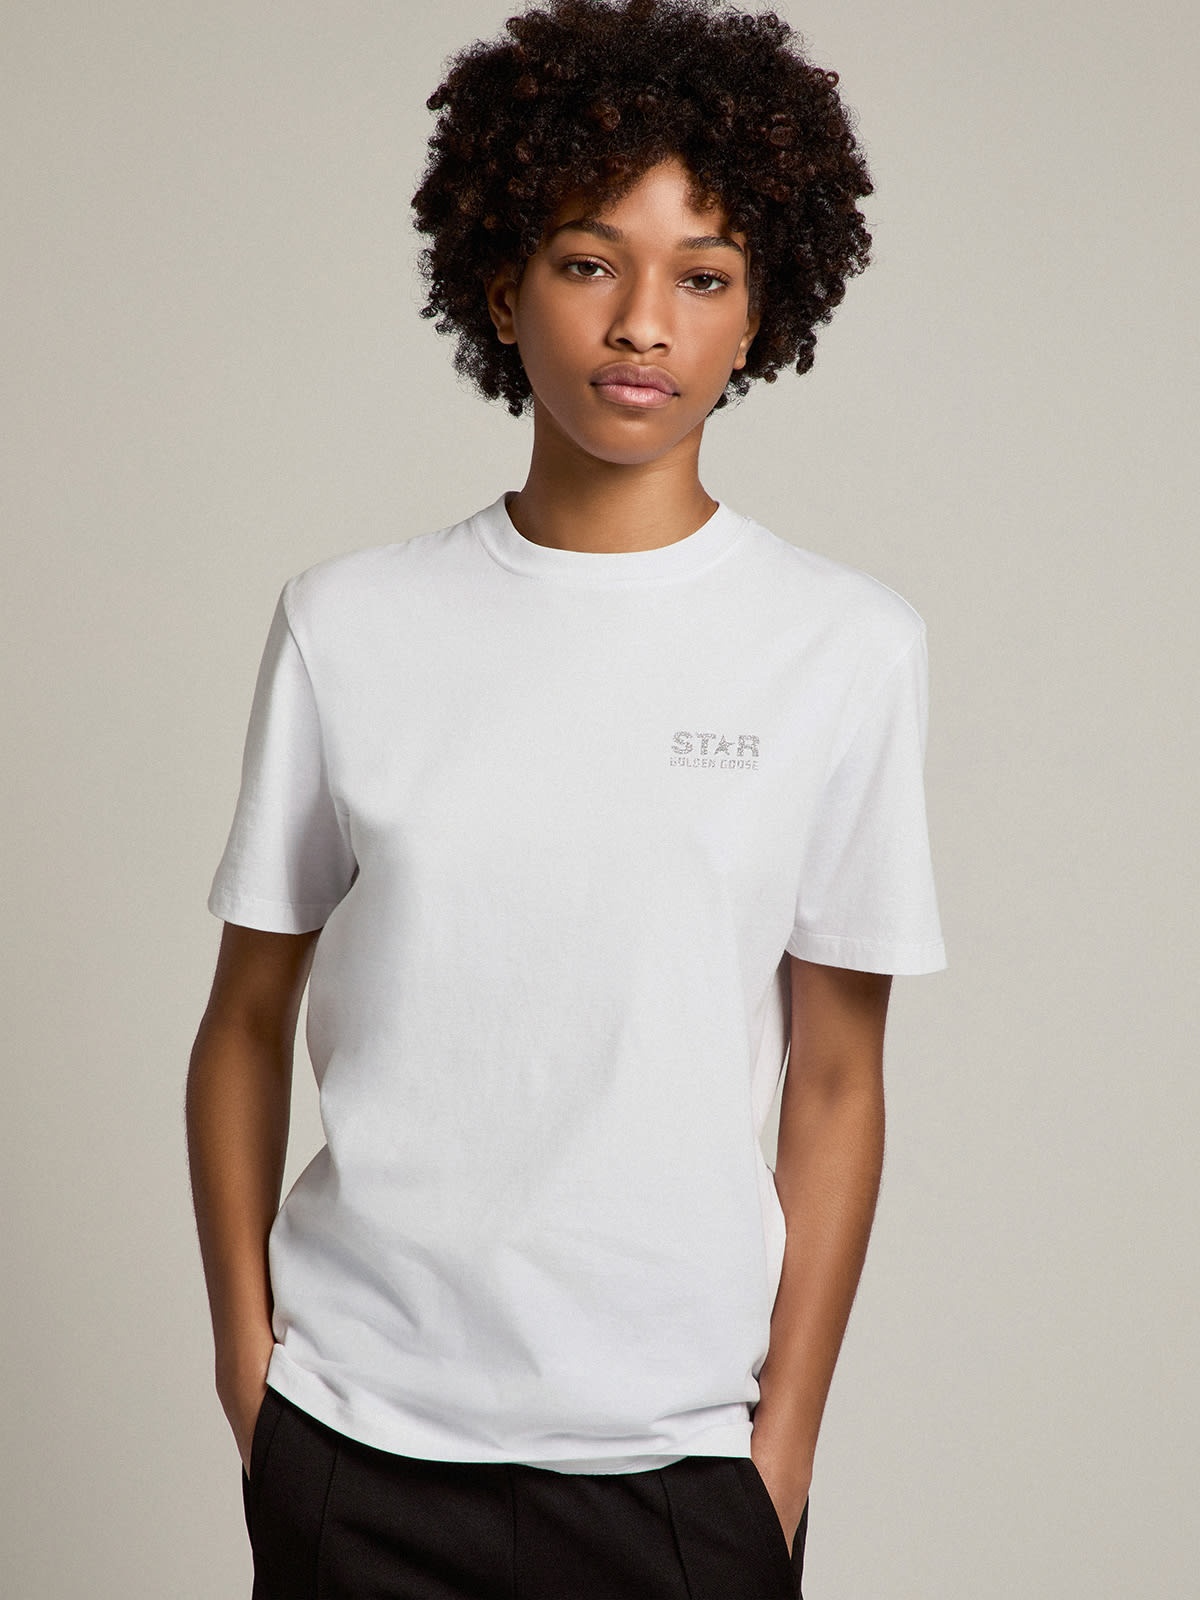 Women's white T-shirt with silver glitter logo and star - 3